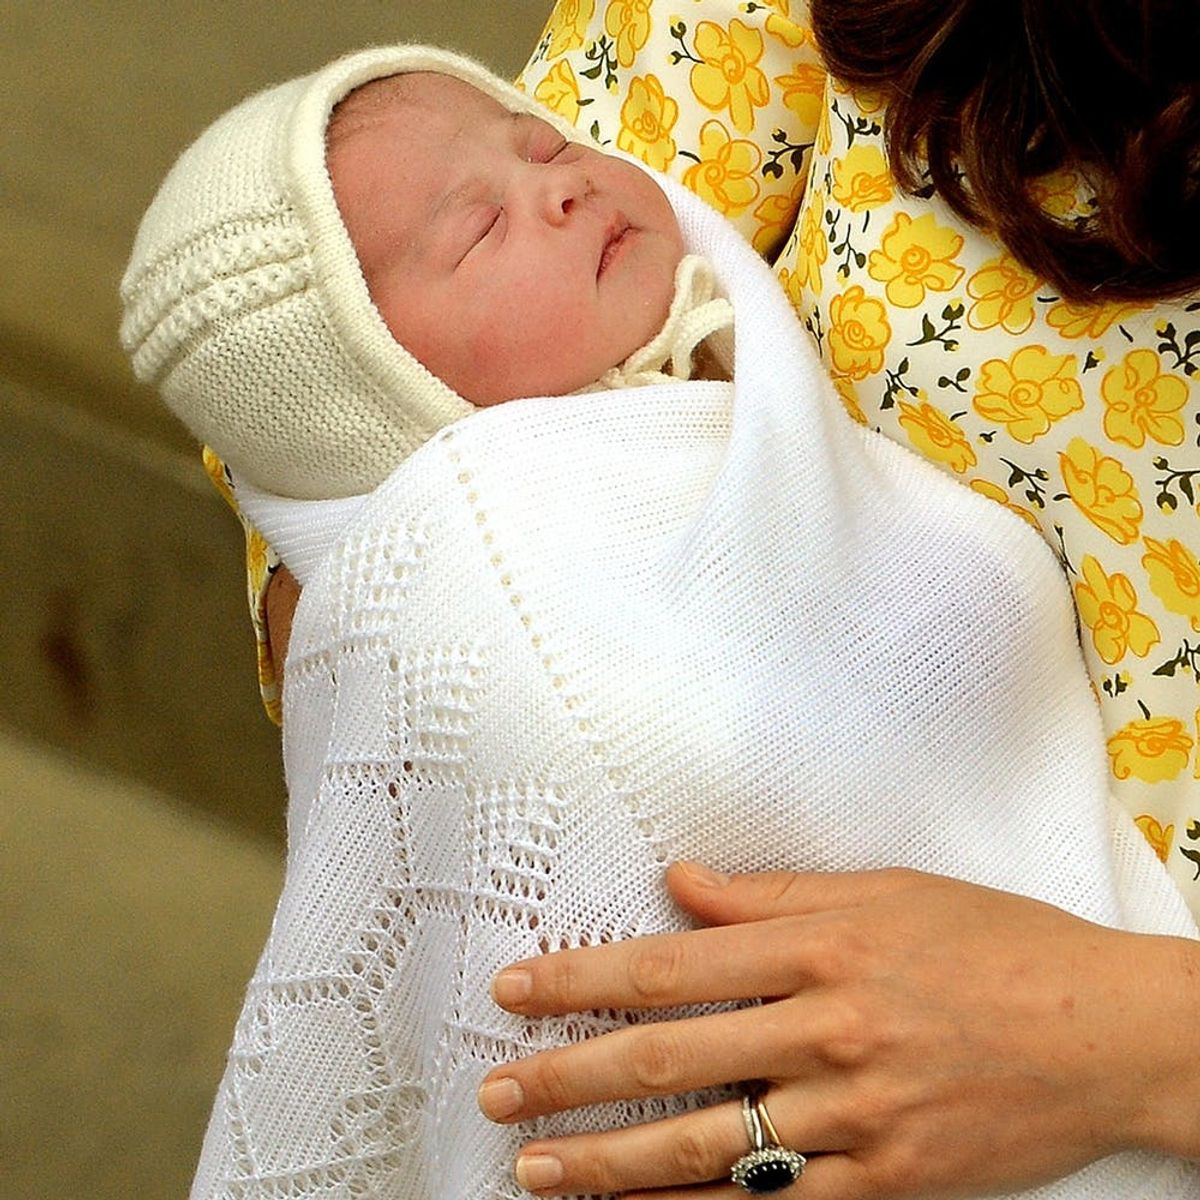 The New Royal Baby Name Is Everything We Hoped It Would Be